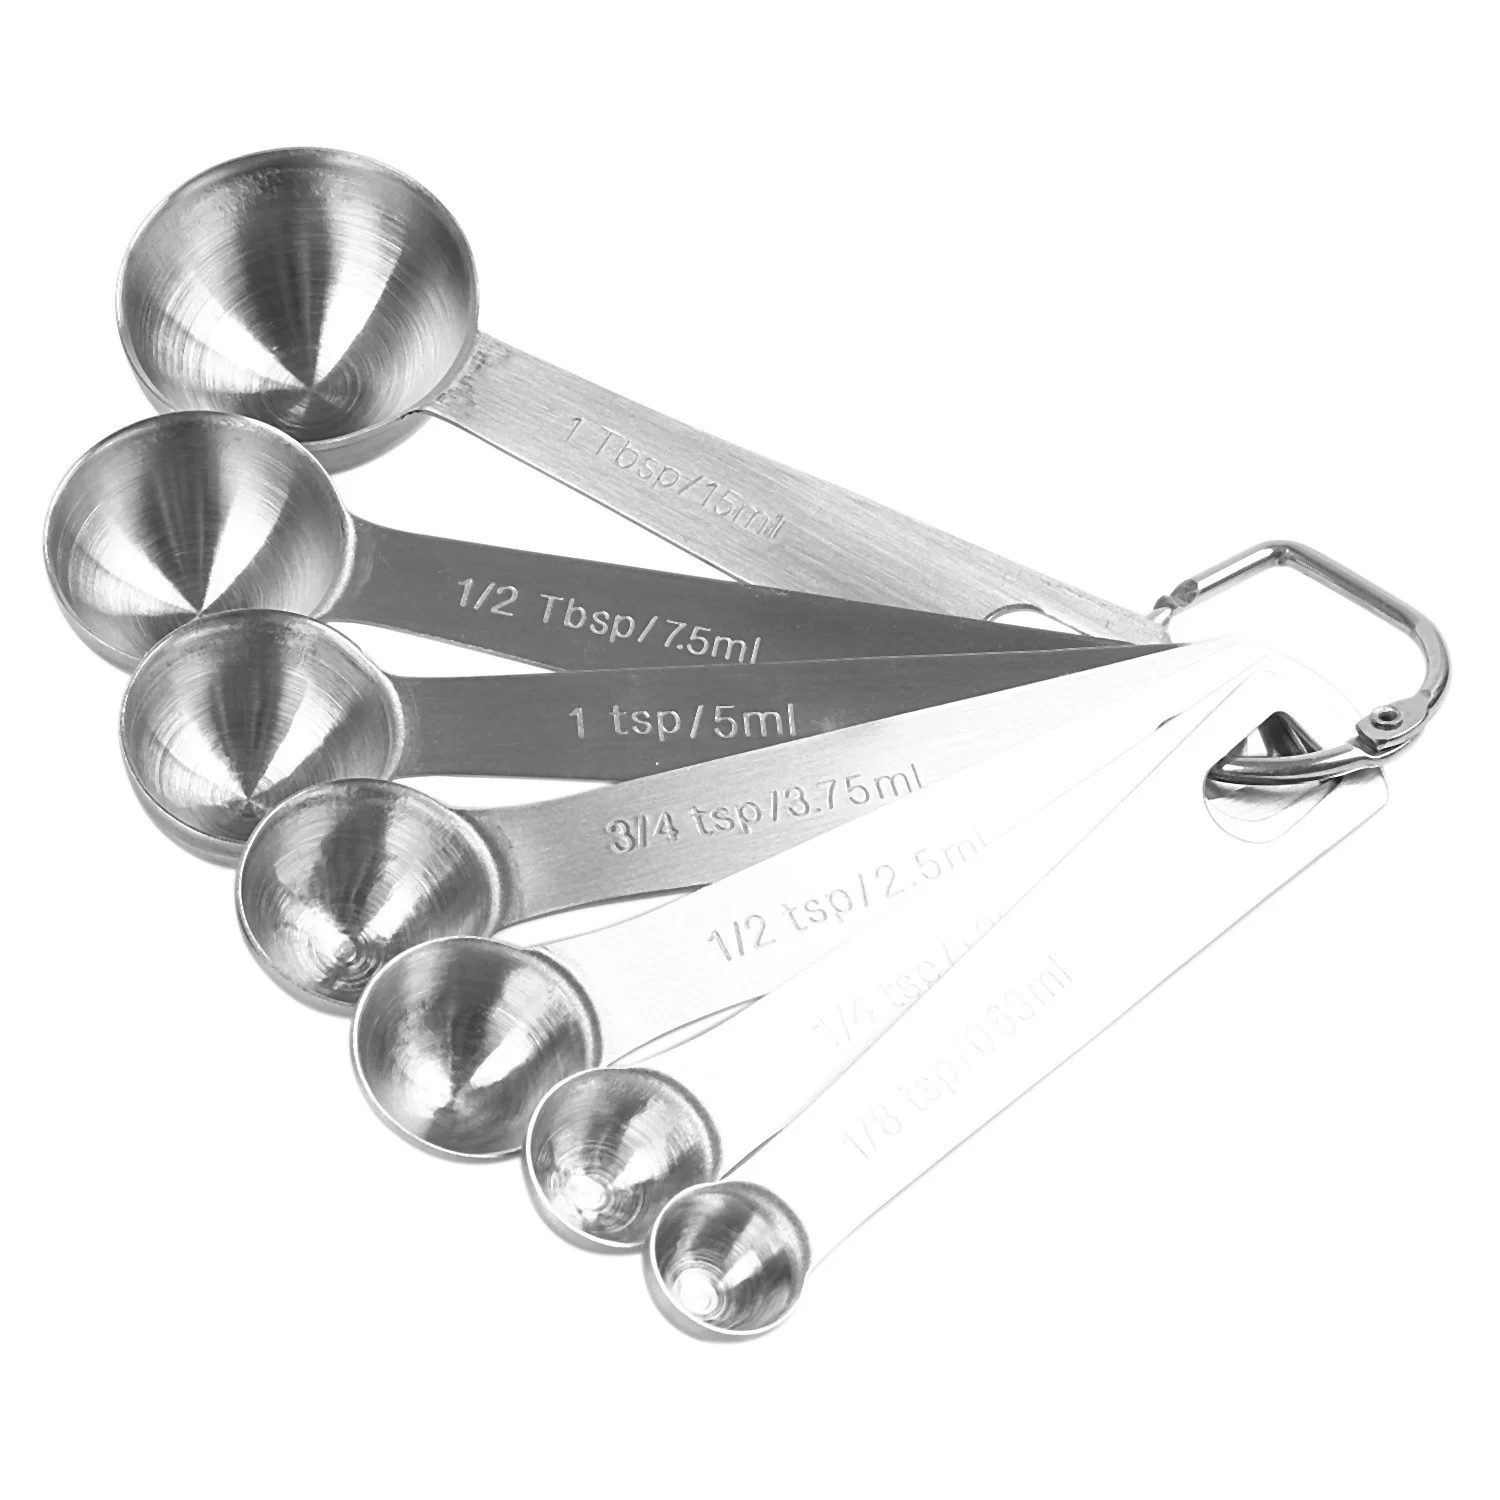 https://ae01.alicdn.com/kf/S0209dfa532b74a51a355bb81689febe3H/Chef-Measuring-Spoons-Heavy-Duty-Round-Stainless-Steel-Metal-for-Dry-or-Liquid-Set-of-7.jpg